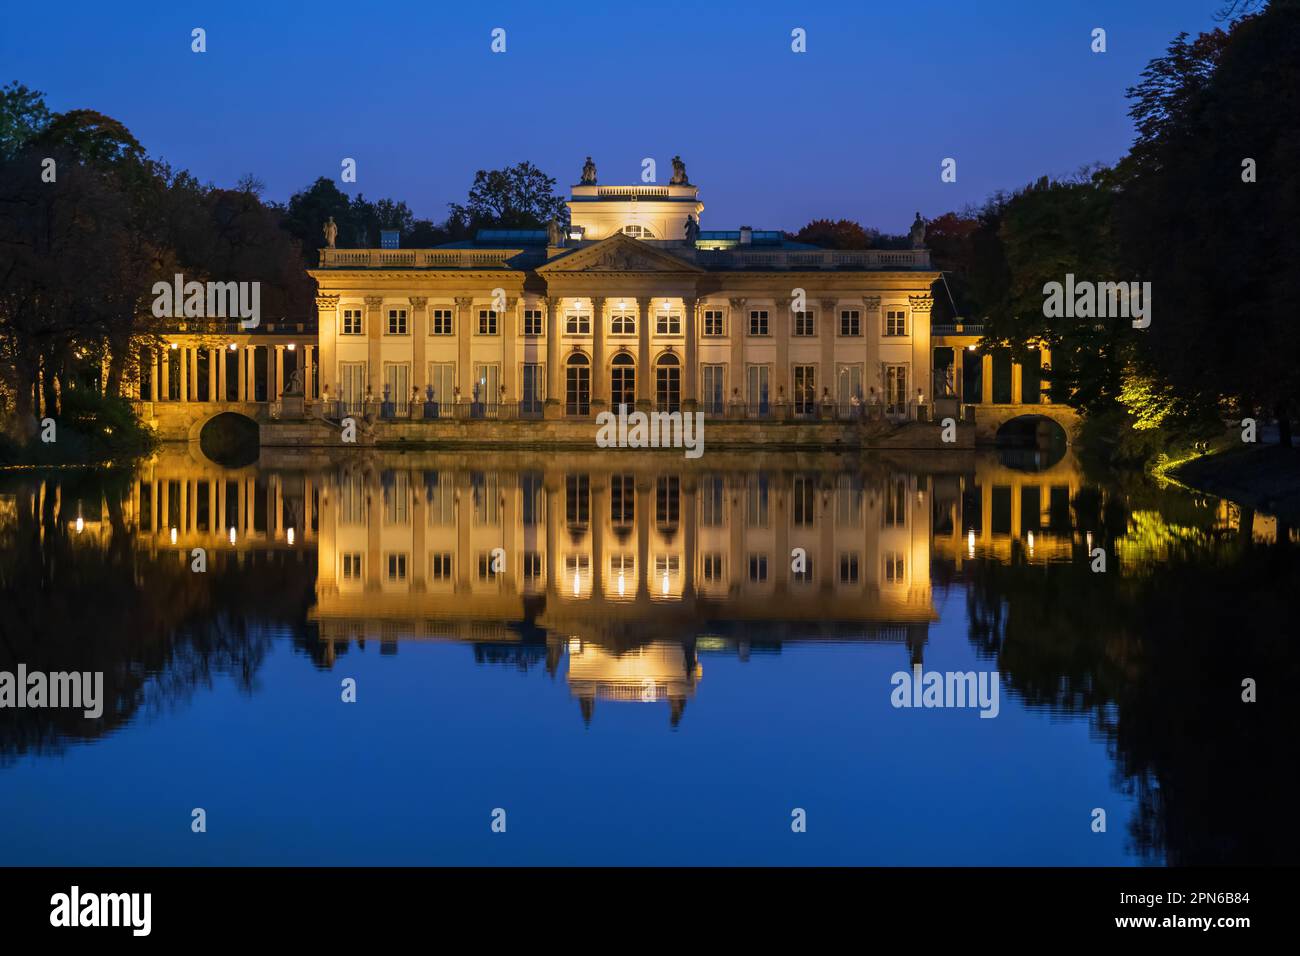 The Palace on the Isle illuminated by night in the Royal Lazienki Park in city of Warsaw, Poland. Summer residence of king Stanisław August Poniatowsk Stock Photo